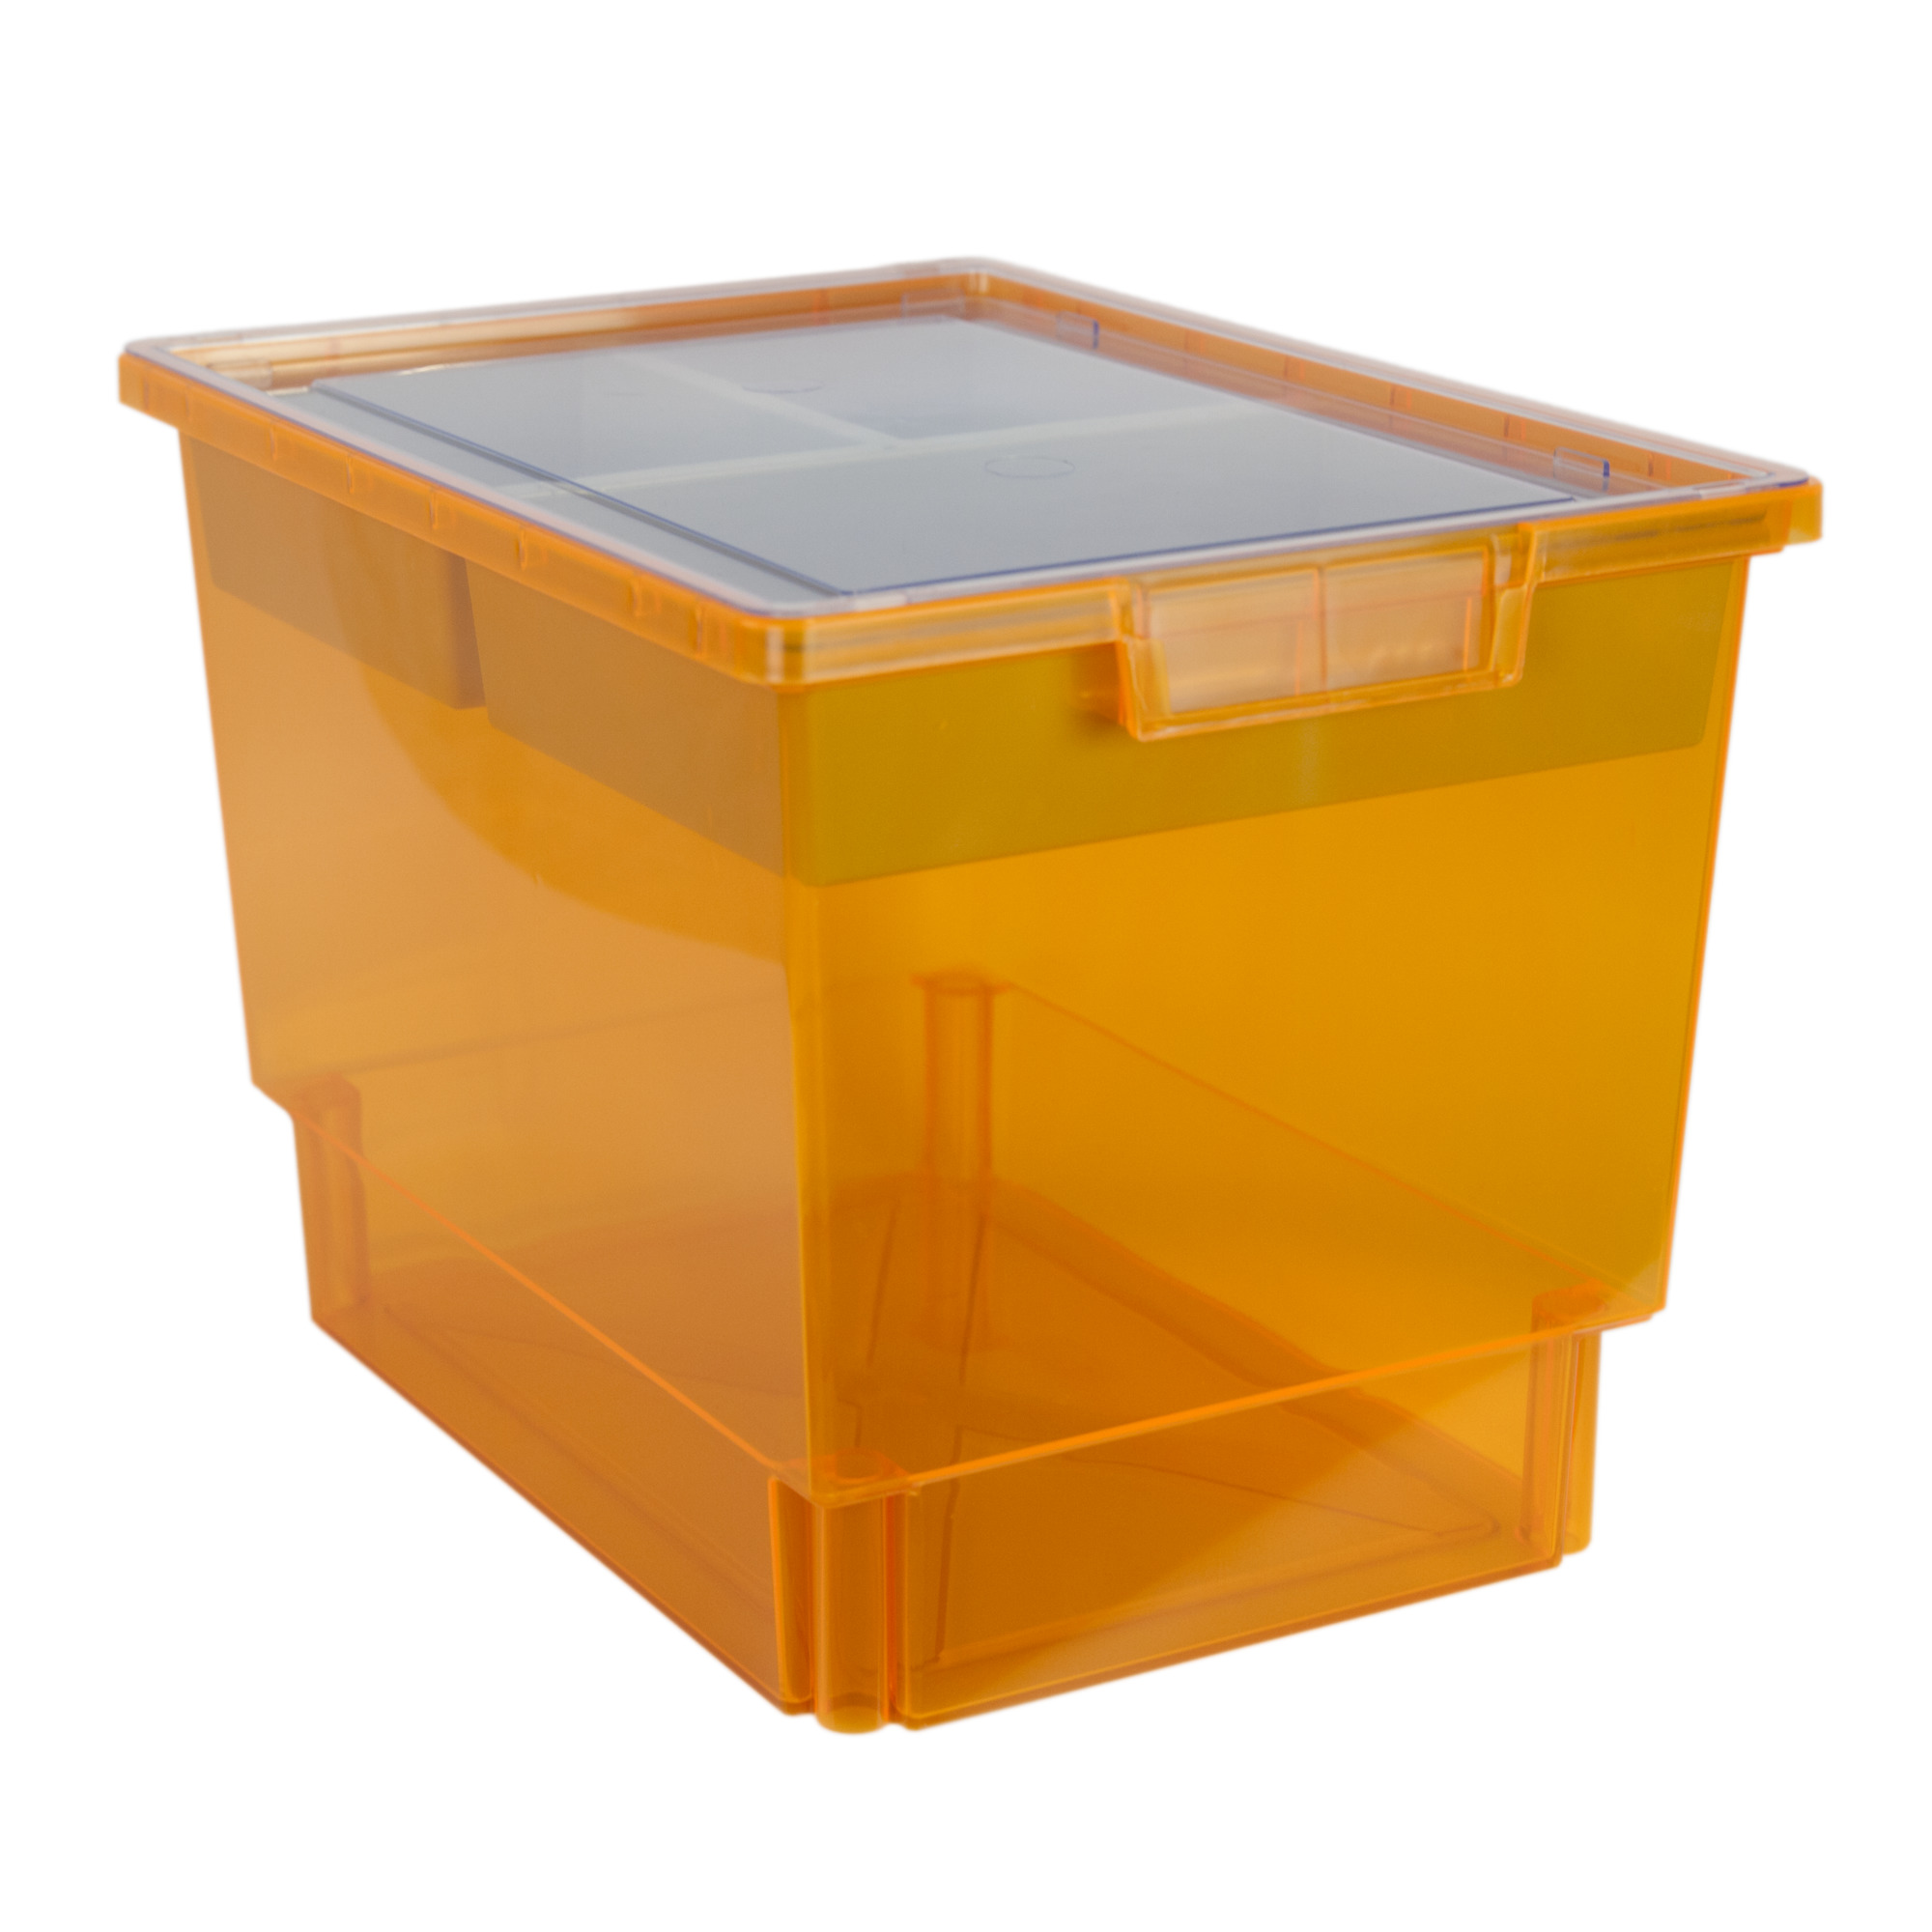 Certwood StorWerks, Slim Line 12Inch Tray Kit (3 x Divisions) Orange, Included (qty.) 1, Material Plastic, Height 9 in, Model CE1954FO-NK0004-1